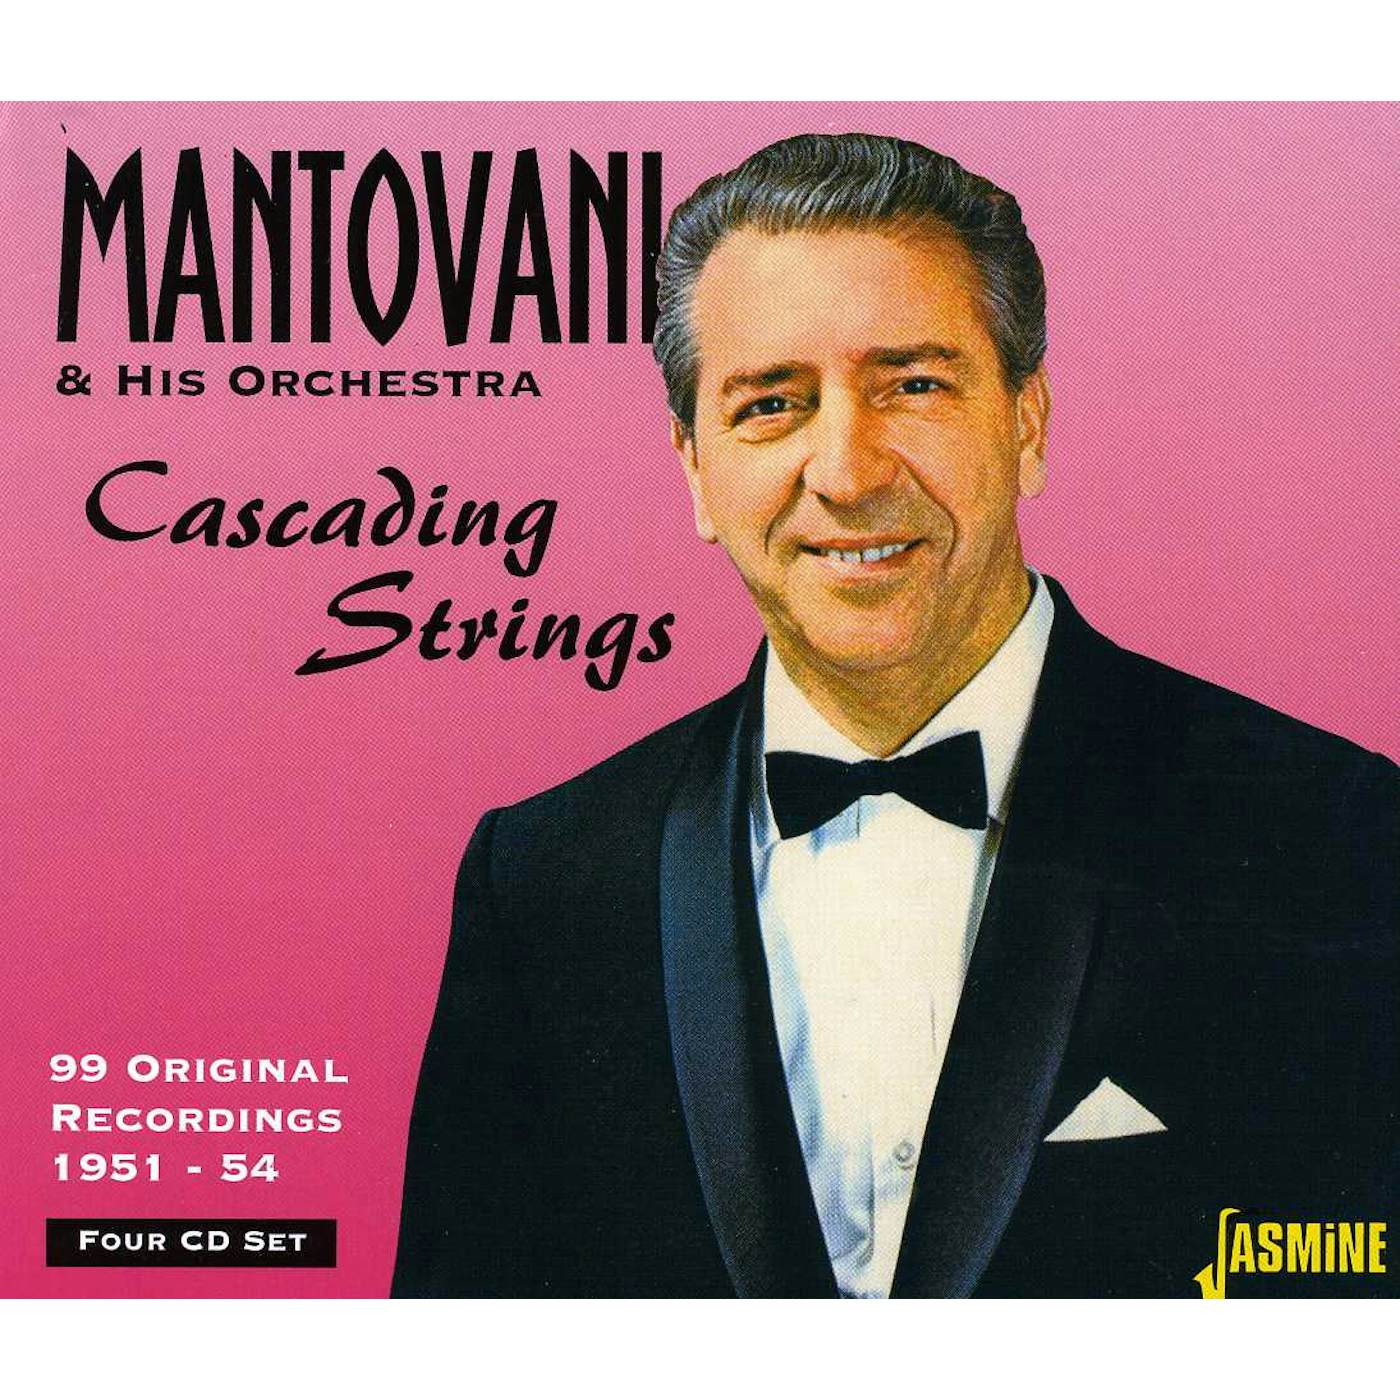 Mantovani & His Orchestra CASCADING STRINGS CD